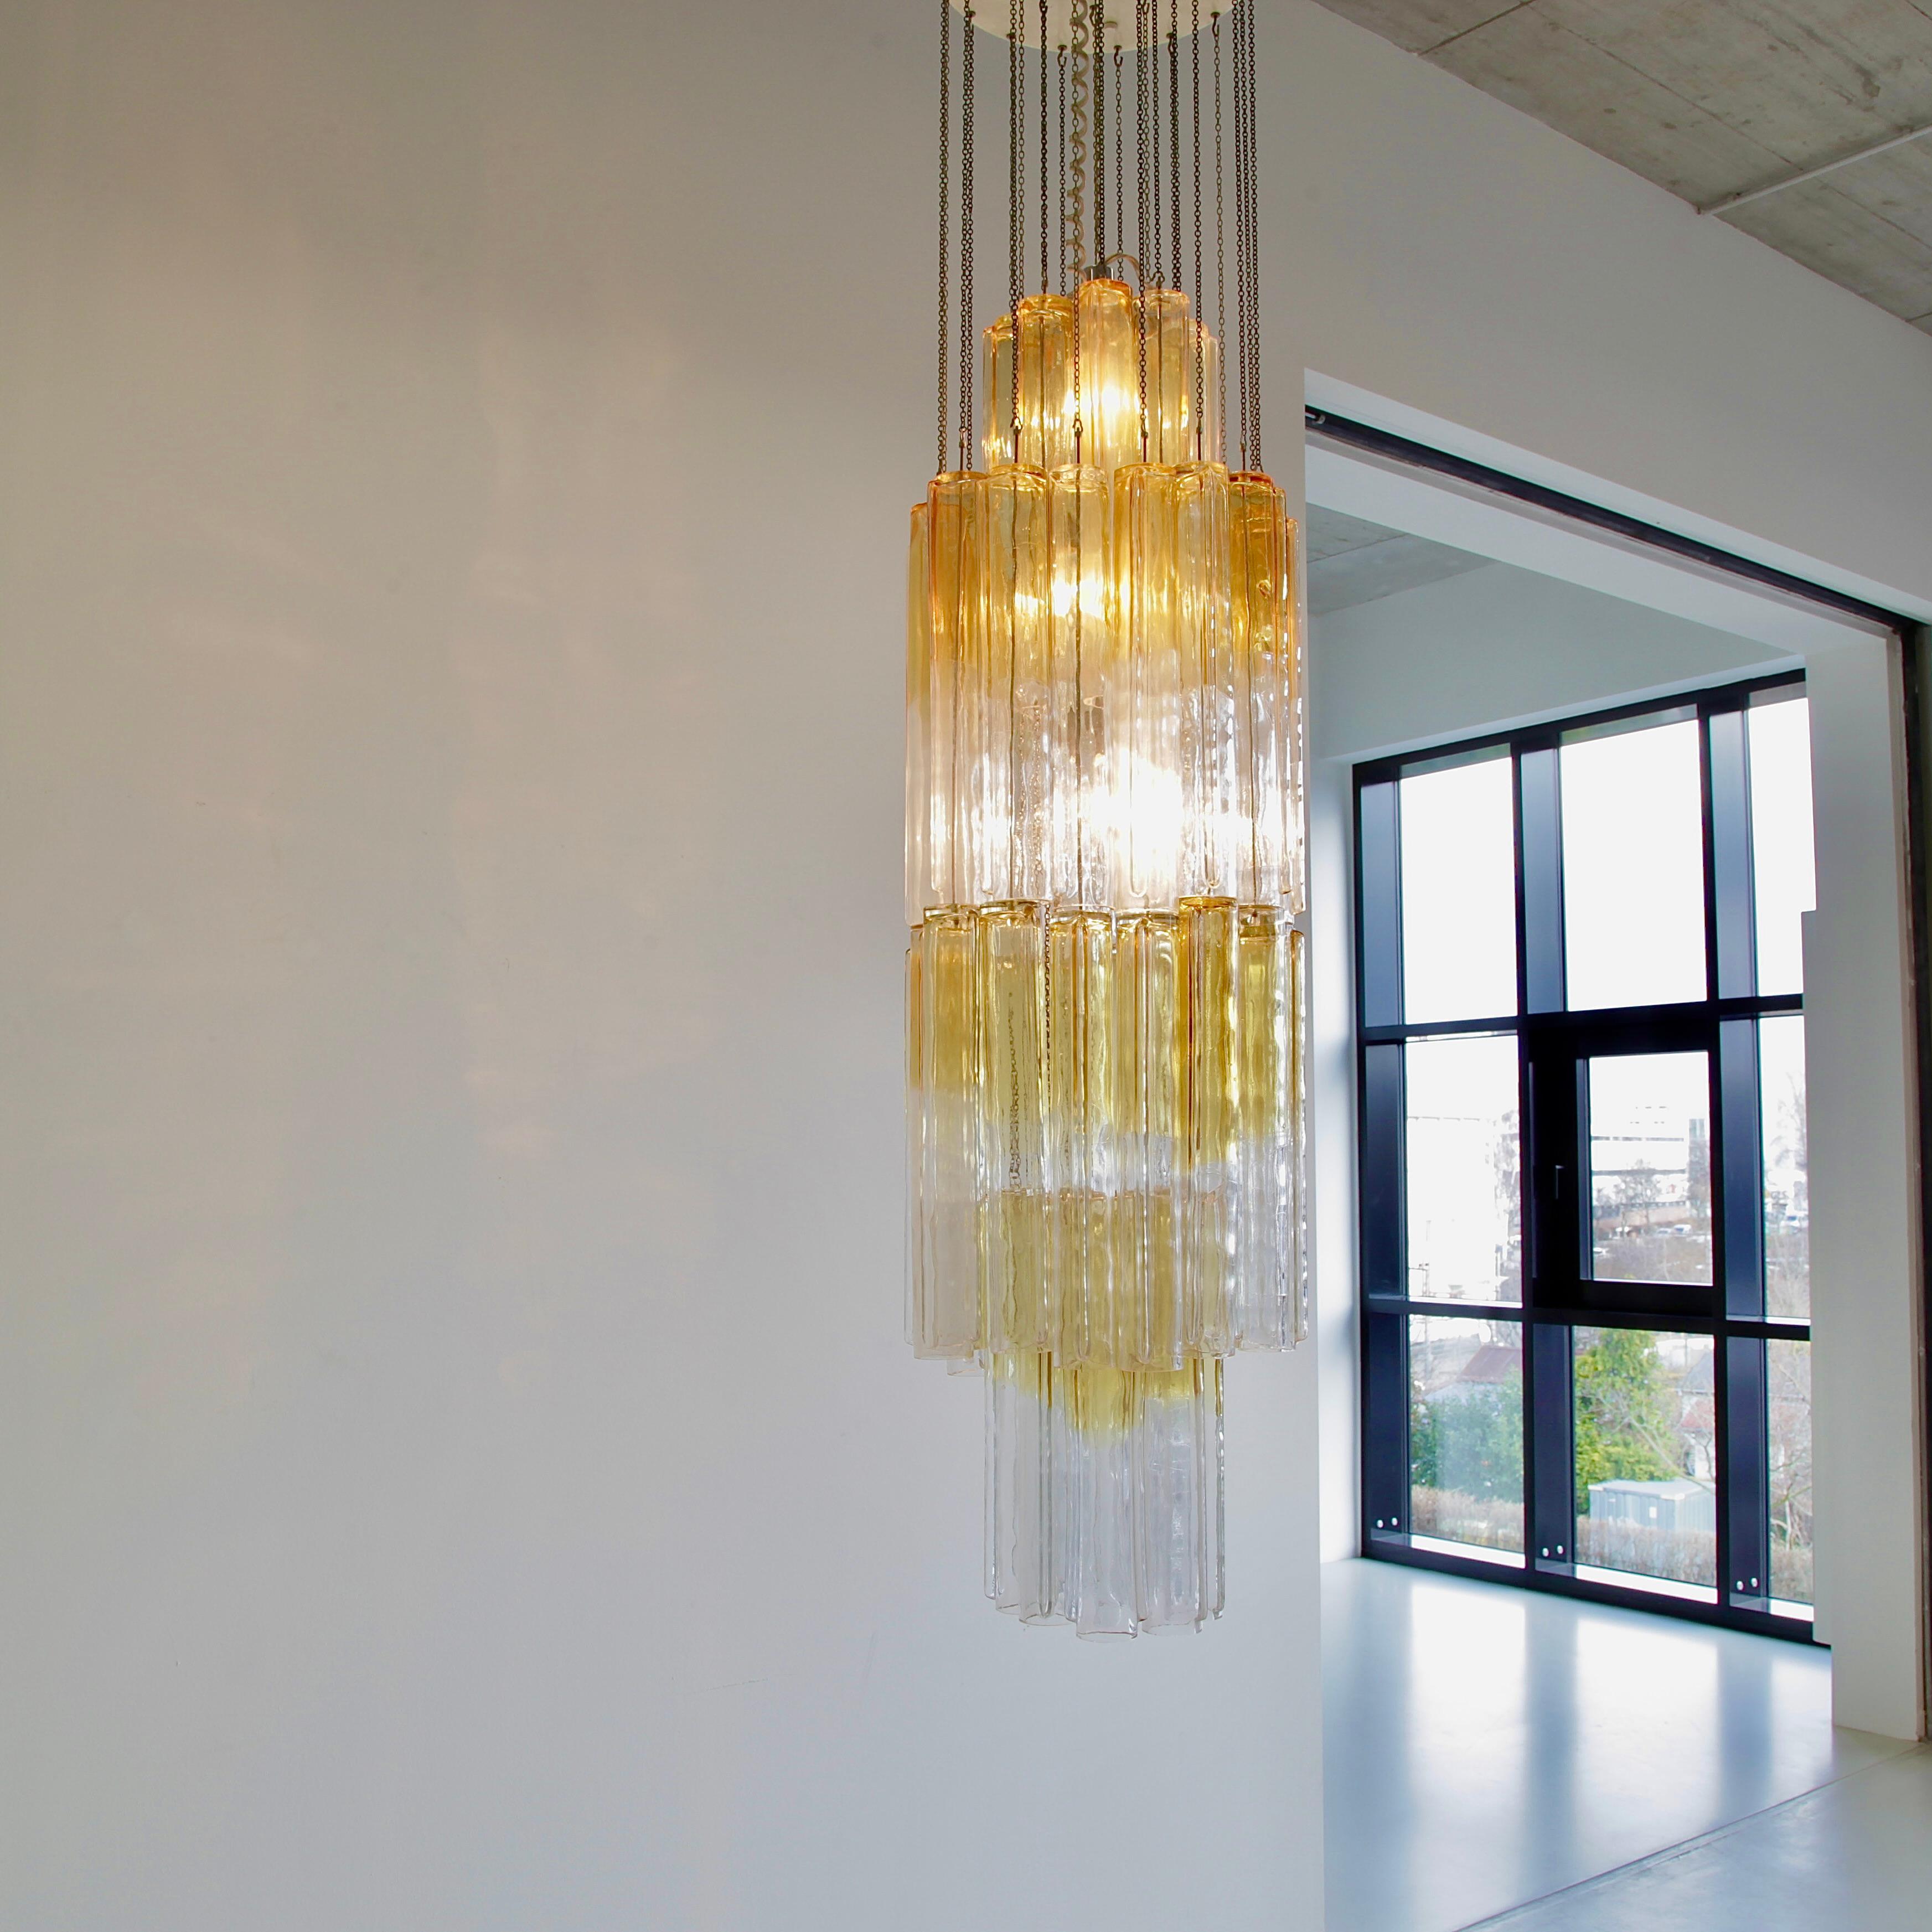 Large Original 'CALZA' Glass Chandelier by Venini, Italy 1960's For Sale 2